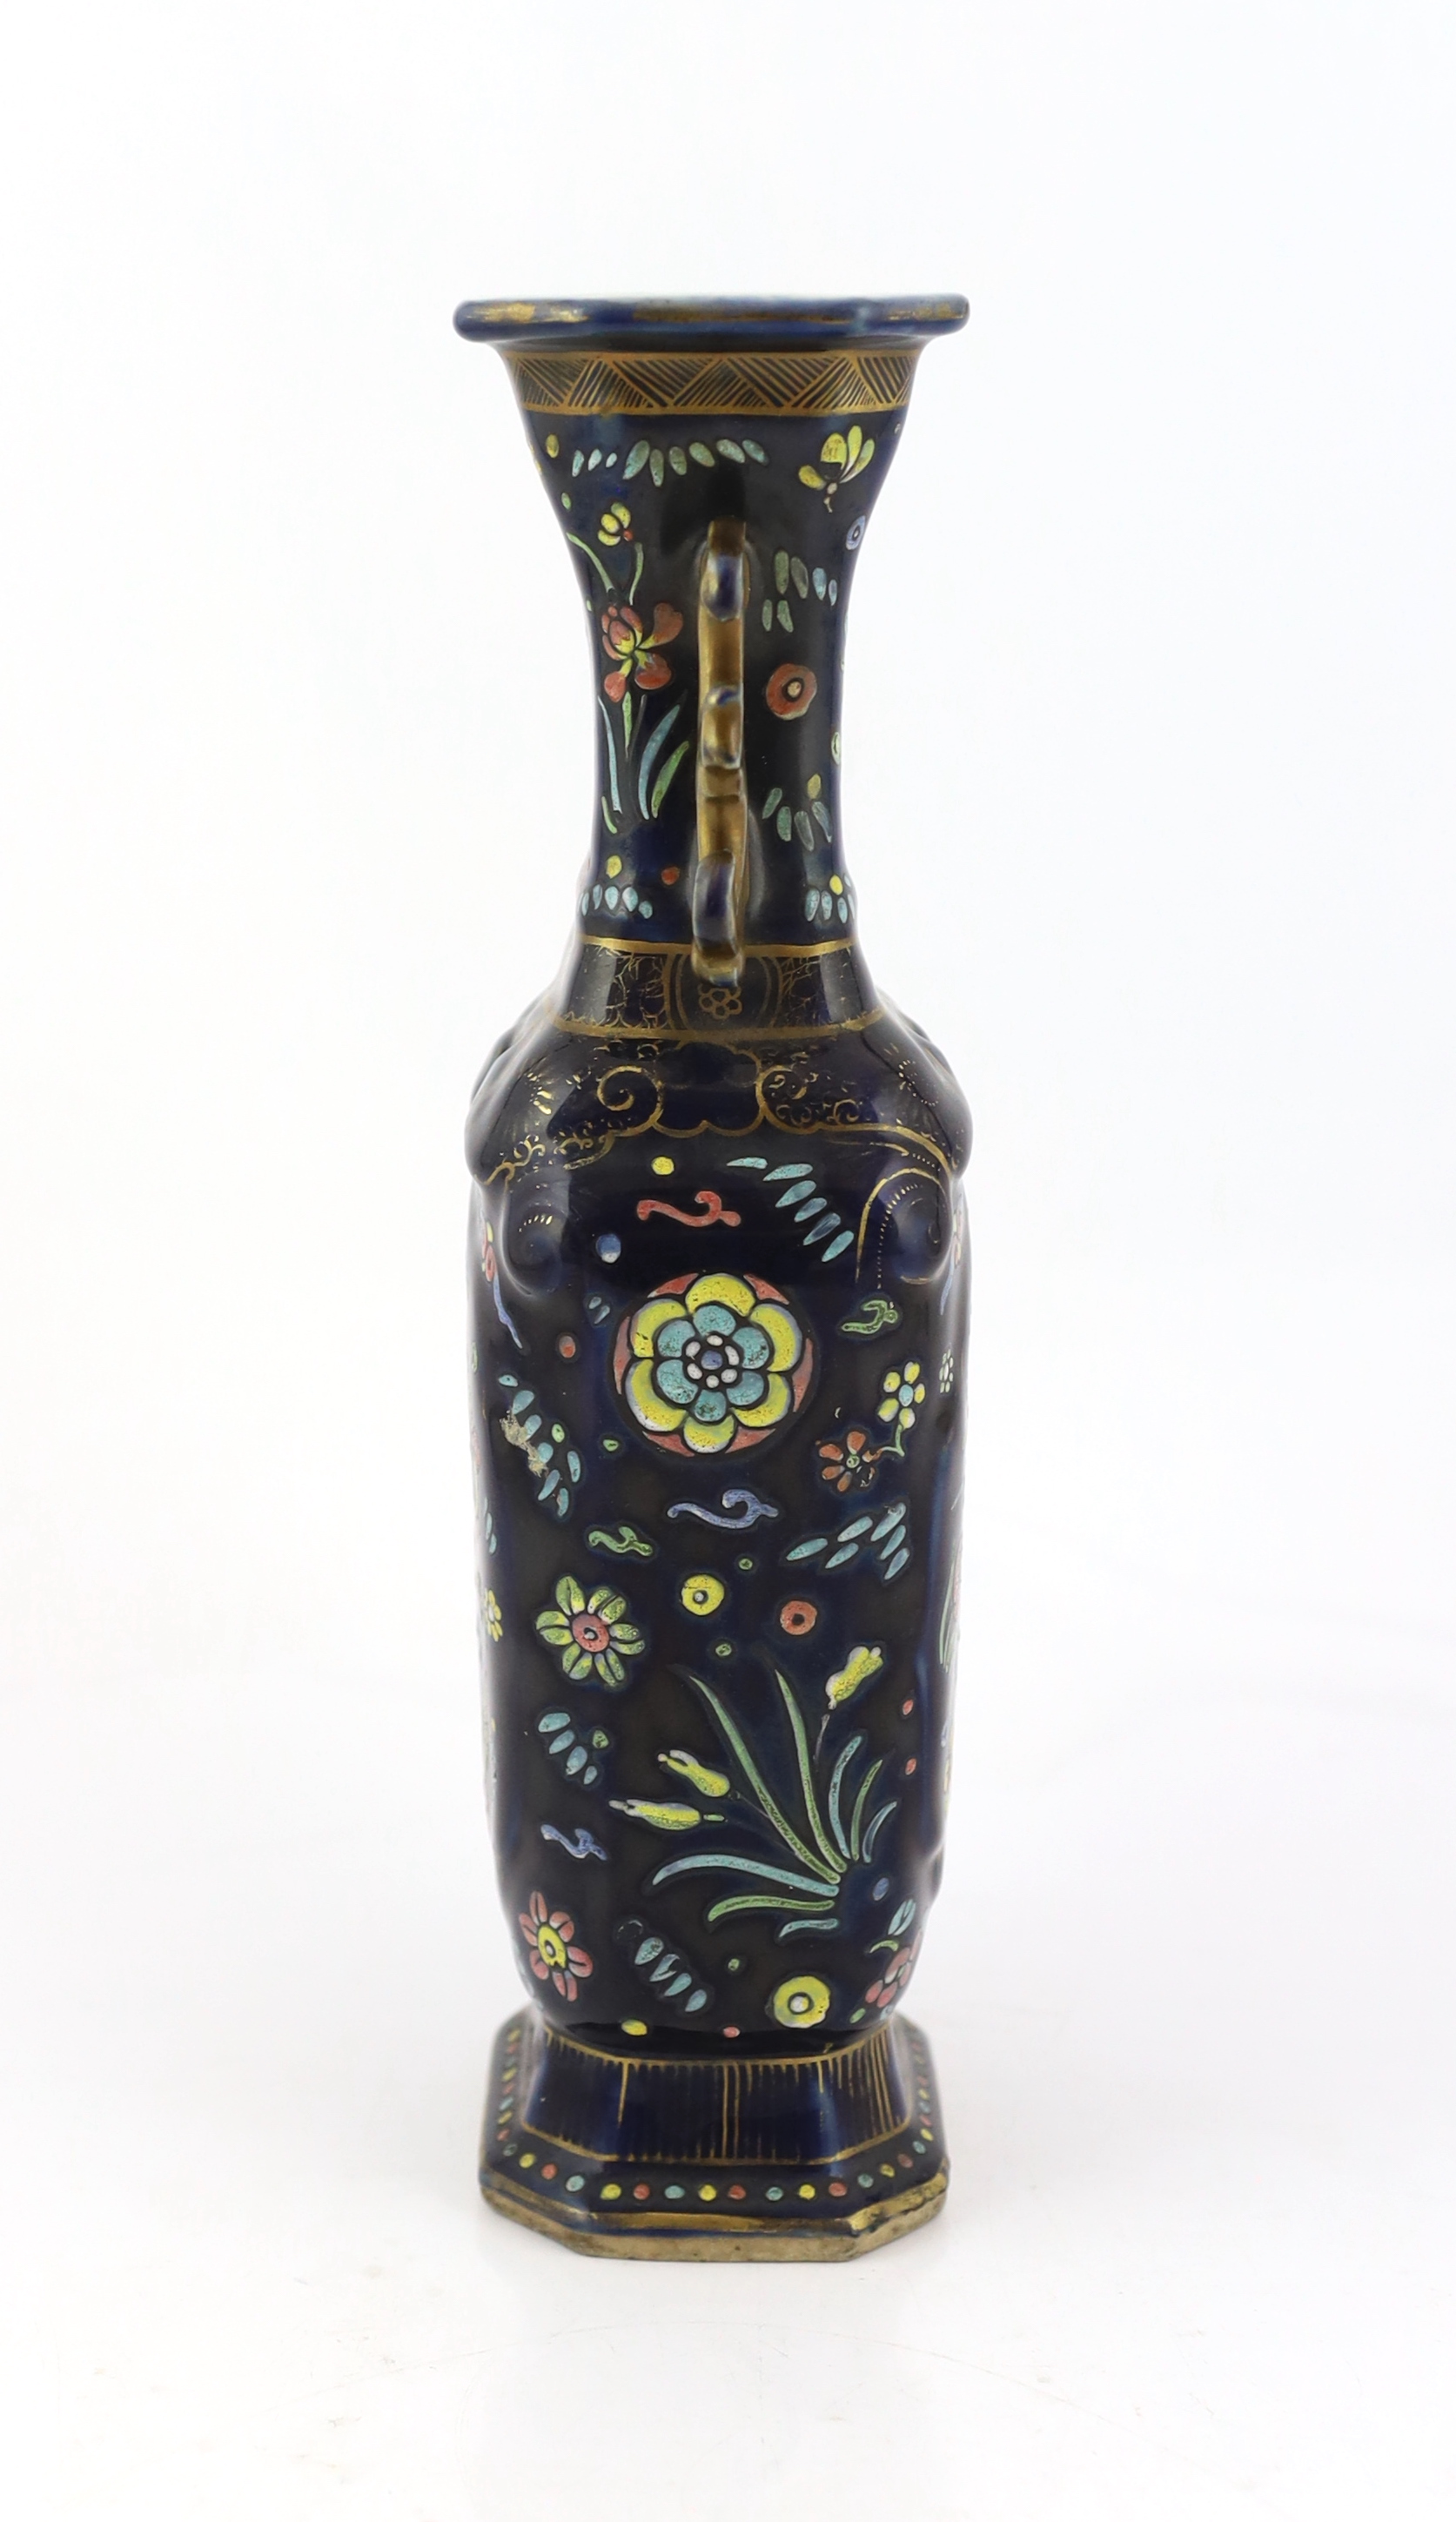 An unusual Chinese blue glazed two handled vase, the porcelain Qianlong period, the enamelled decoration early 19th century English